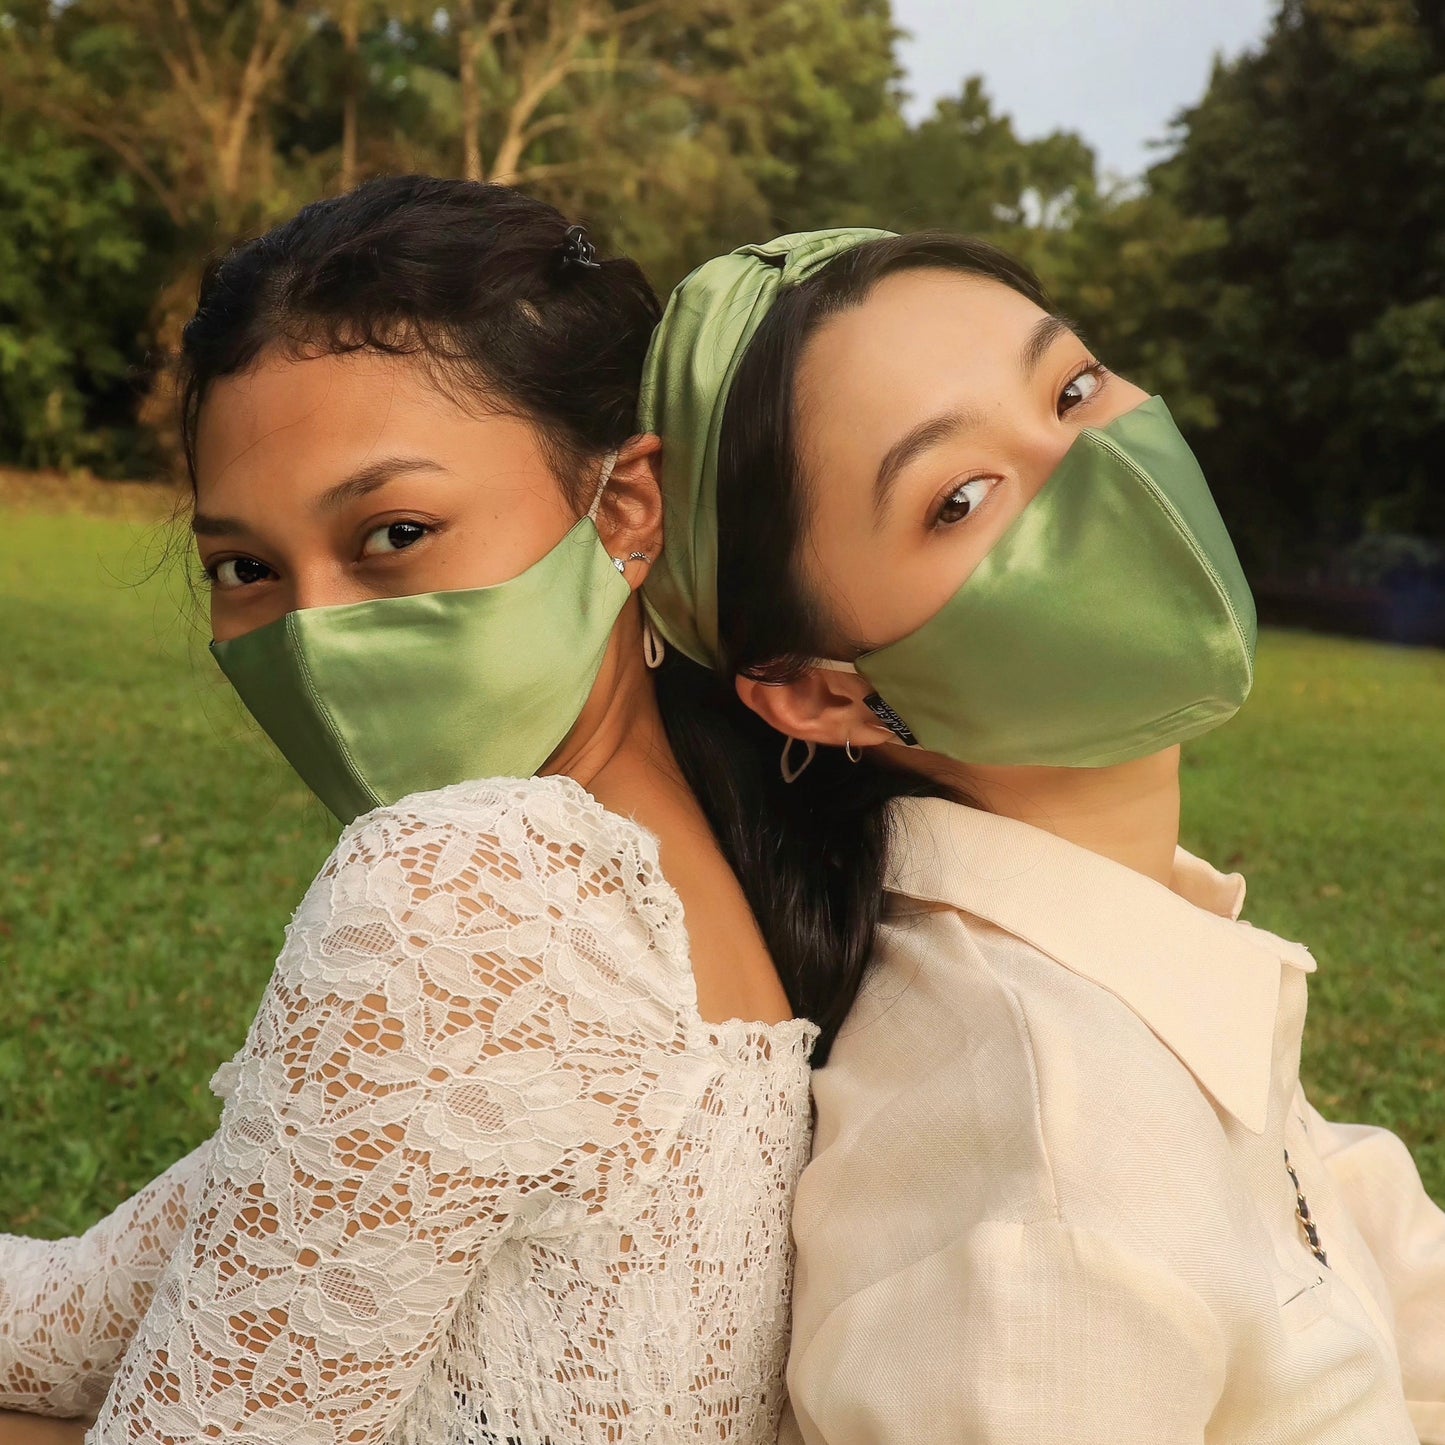 Upgrade your mask collection with our affordable luxurious silk mask. Keep it stylish while staying protected from harmful bacterias.